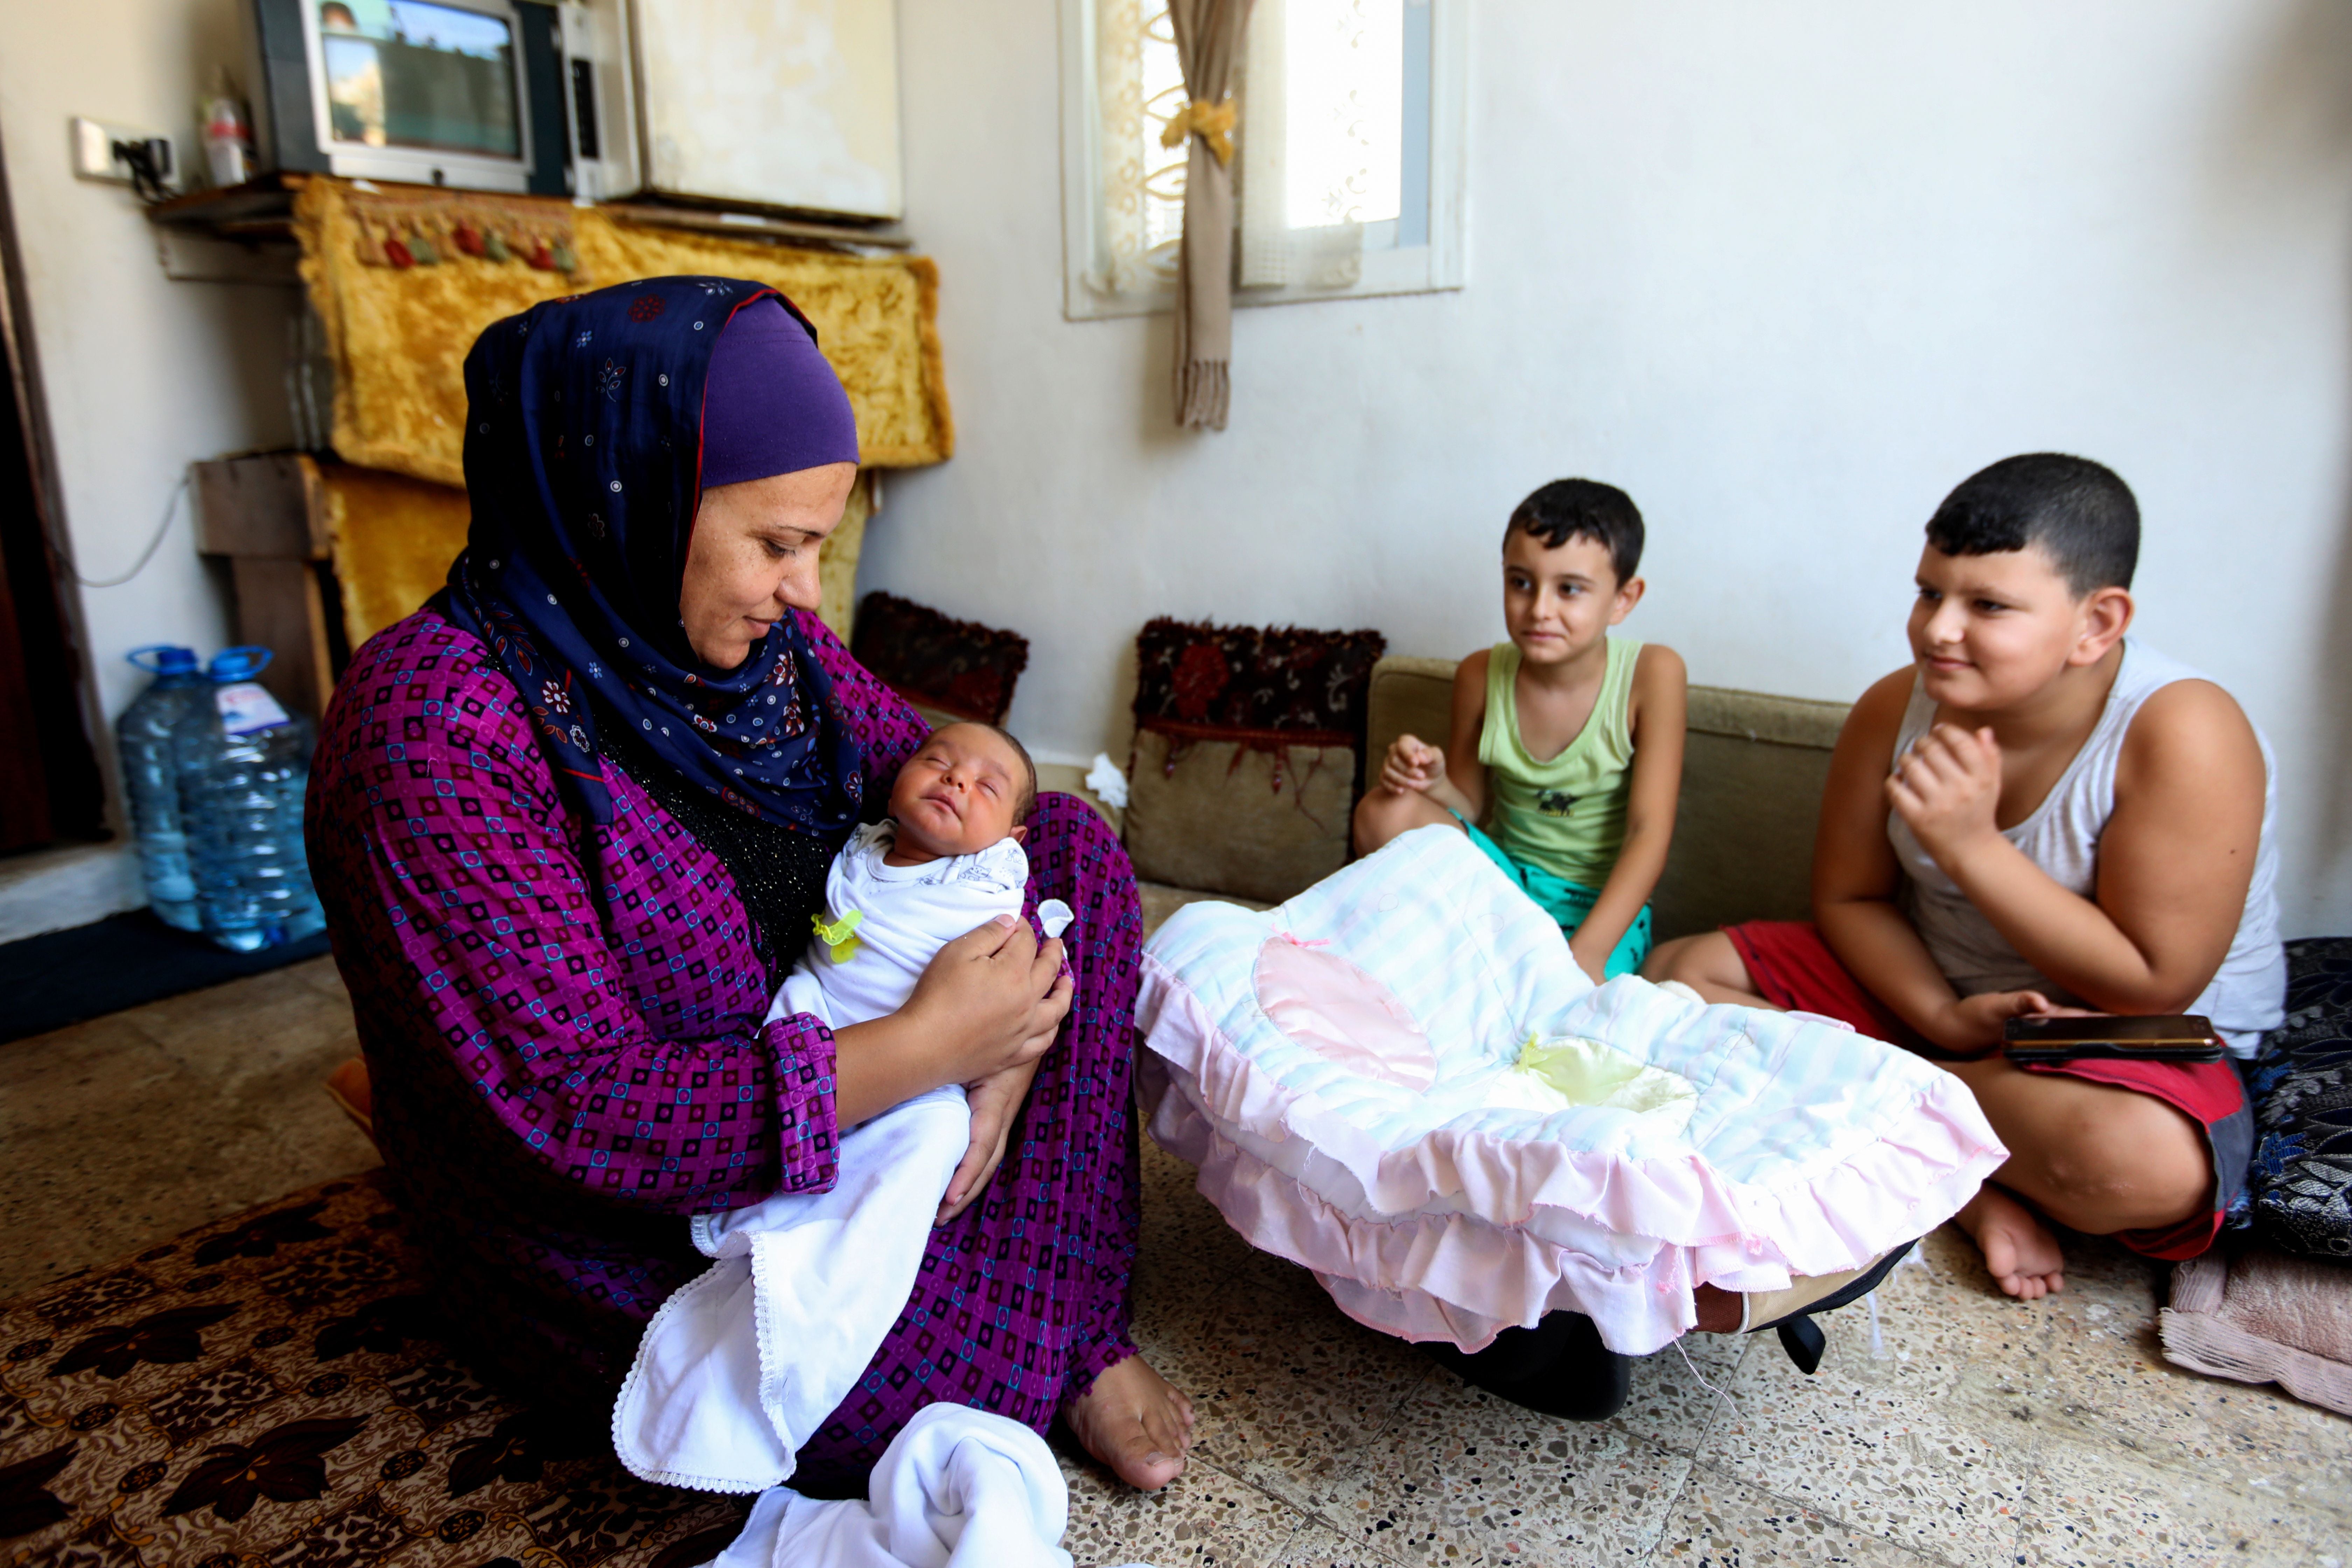 Syrian refugee Rima Jassem holds her newborn girl as she sits with her boys in a small room on the roof of a building overlooking the ravaged port in Lebanese capital Beirut, on September 18, 2020. Refugees living in affected areas in Beirut have also been impacted by the August explosion.